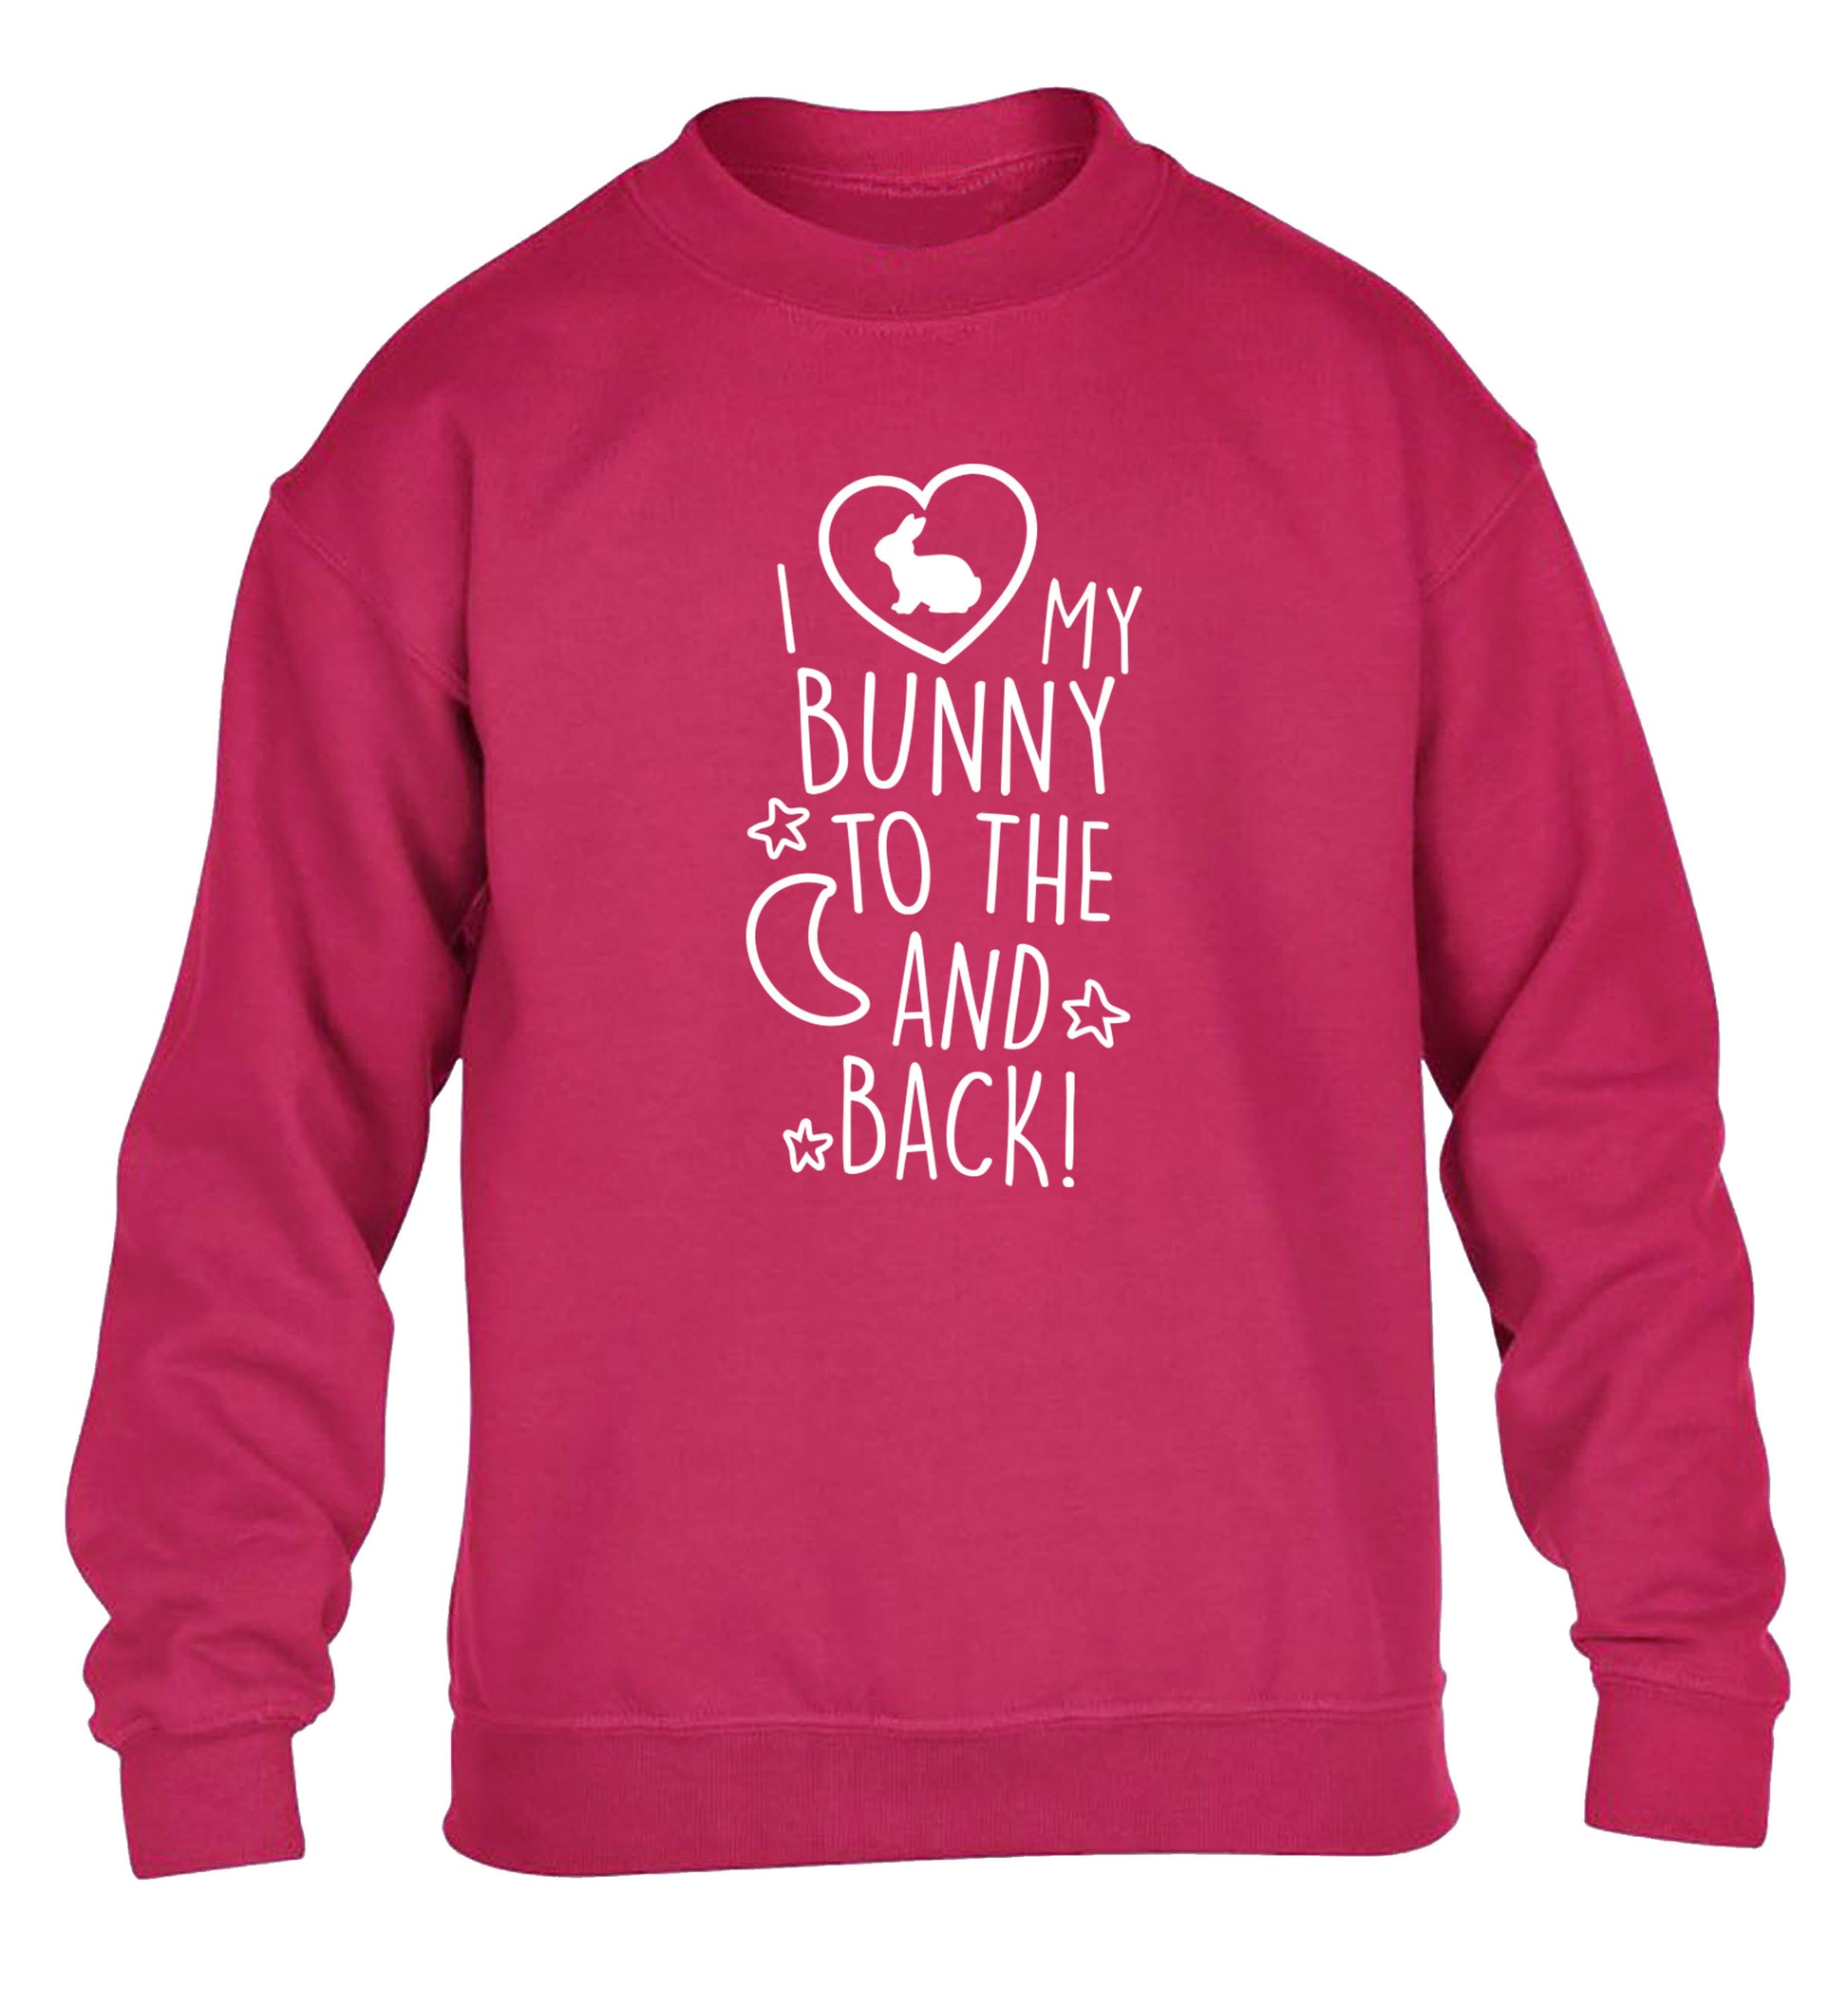 I love my bunny to the moon and back children's pink  sweater 12-14 Years